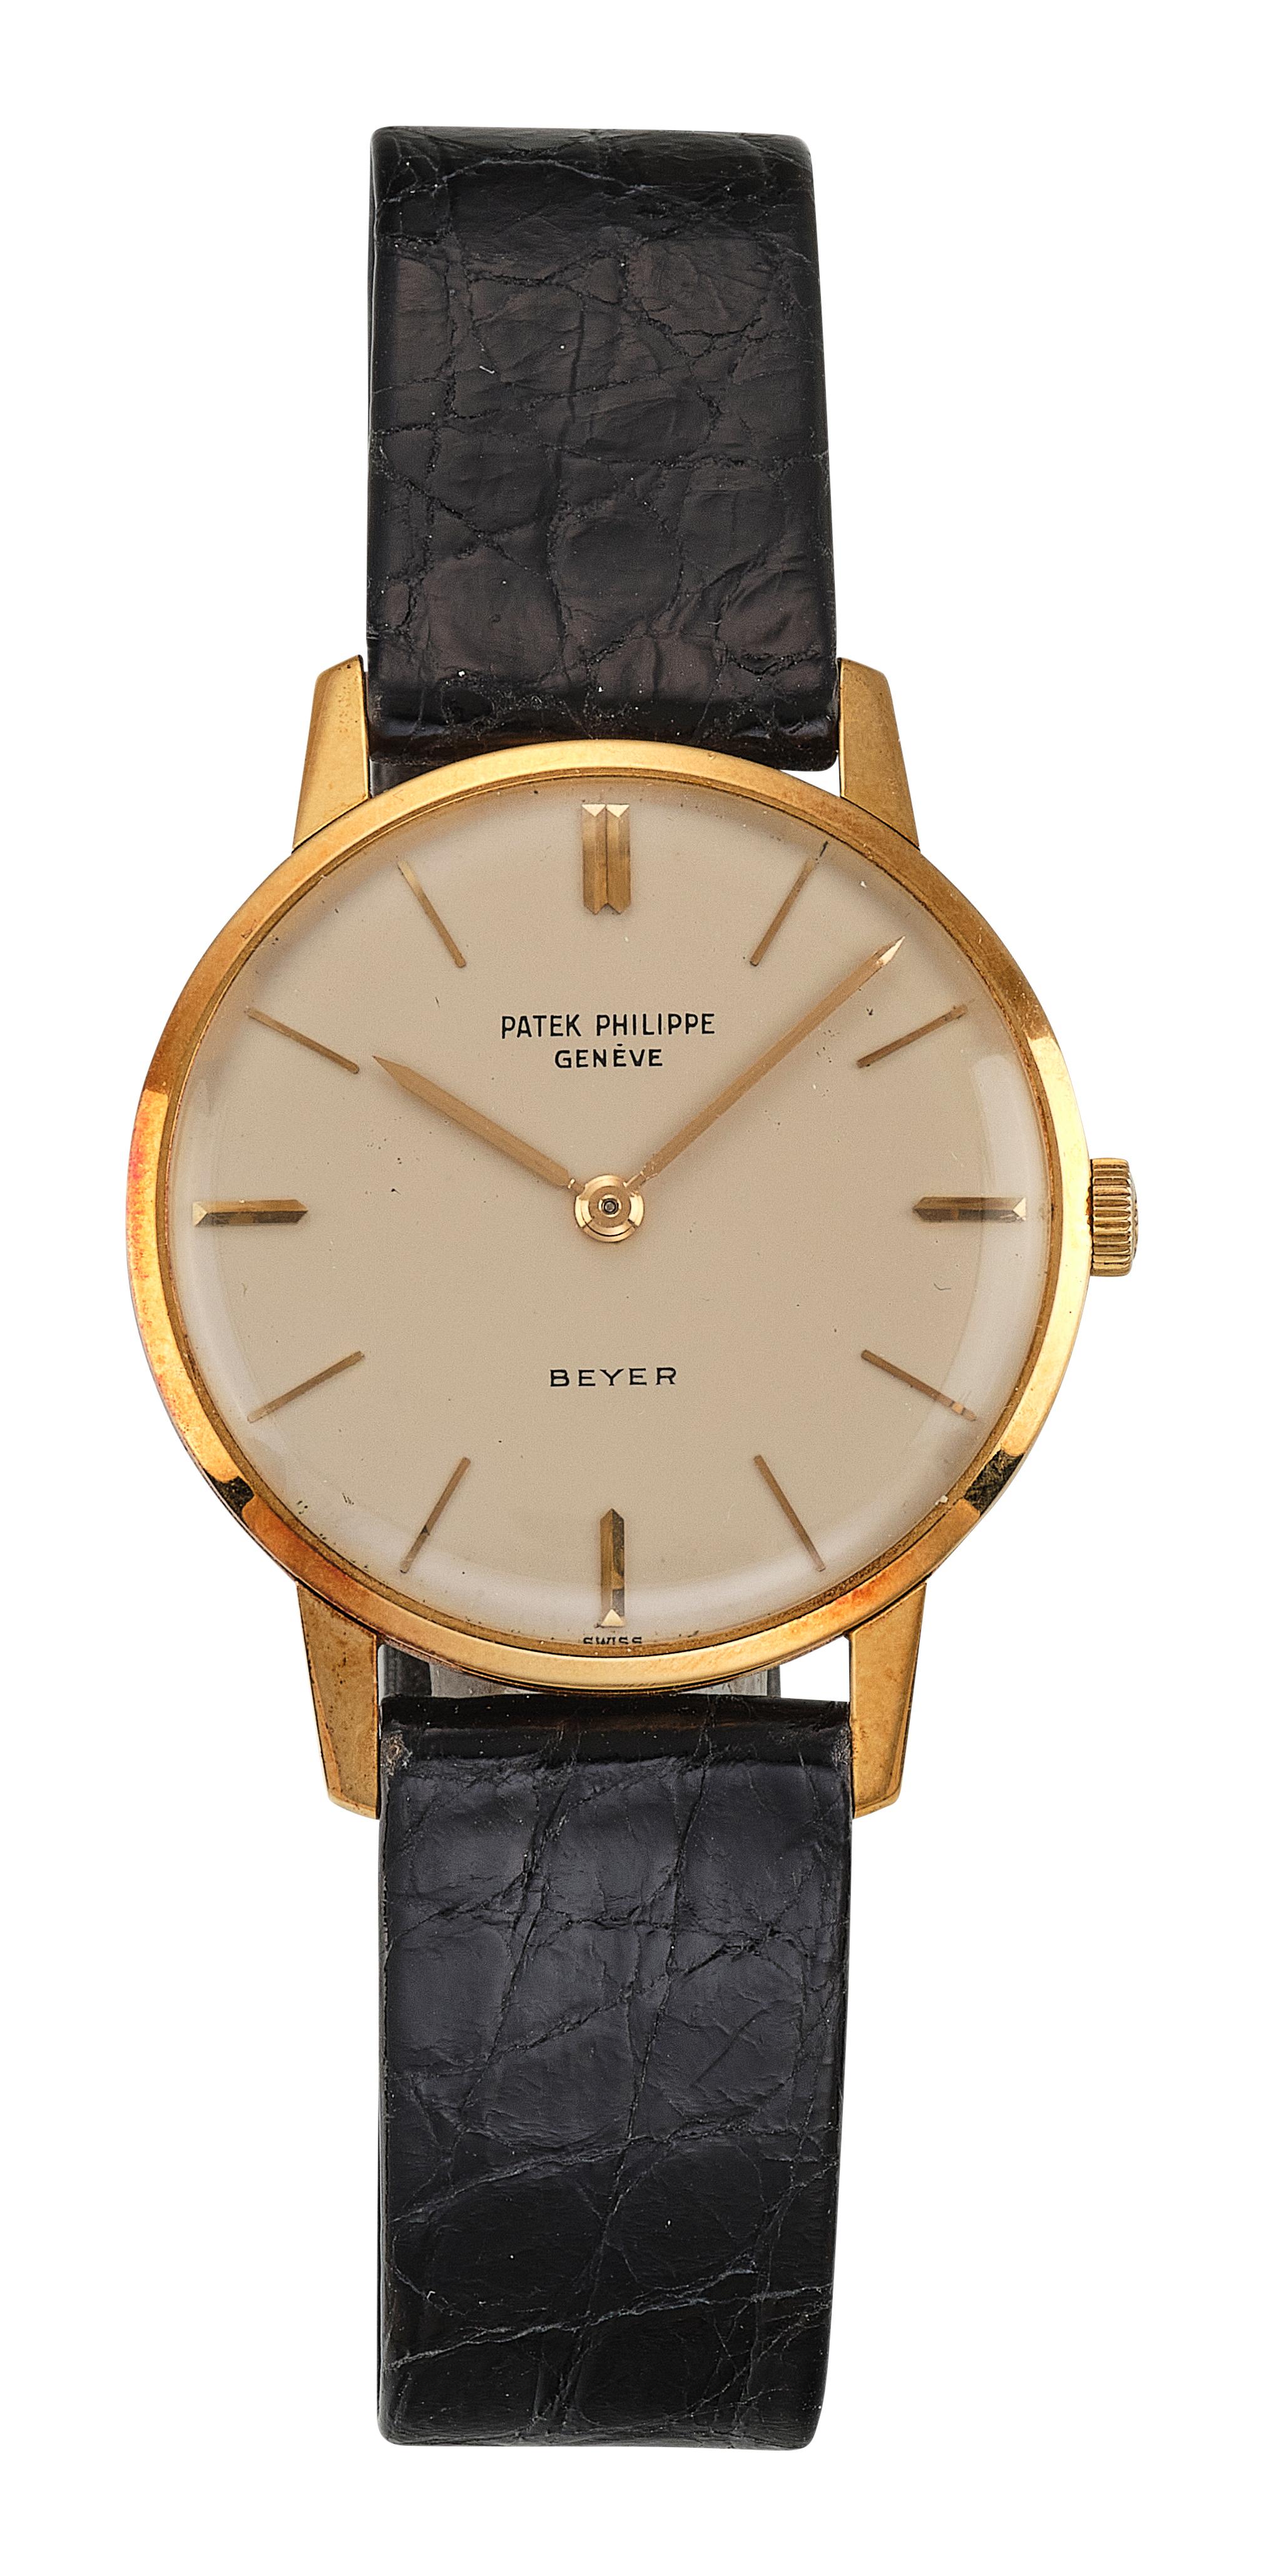 Patek Philippe, Sold by Beyer - Watches and men's accessories